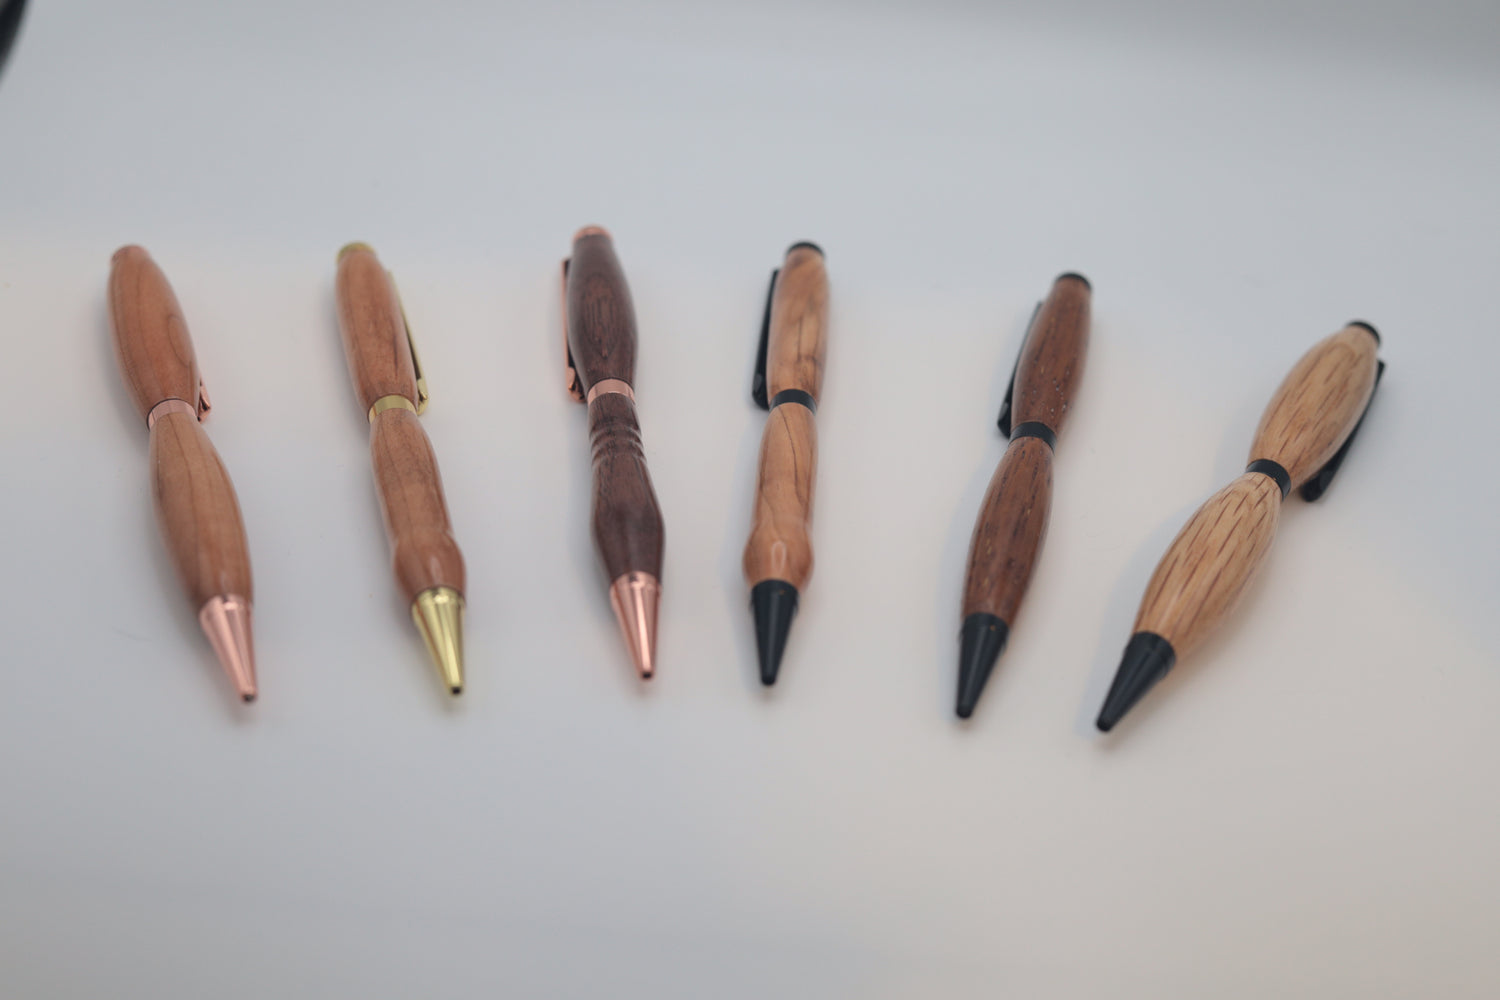 Pen Collections